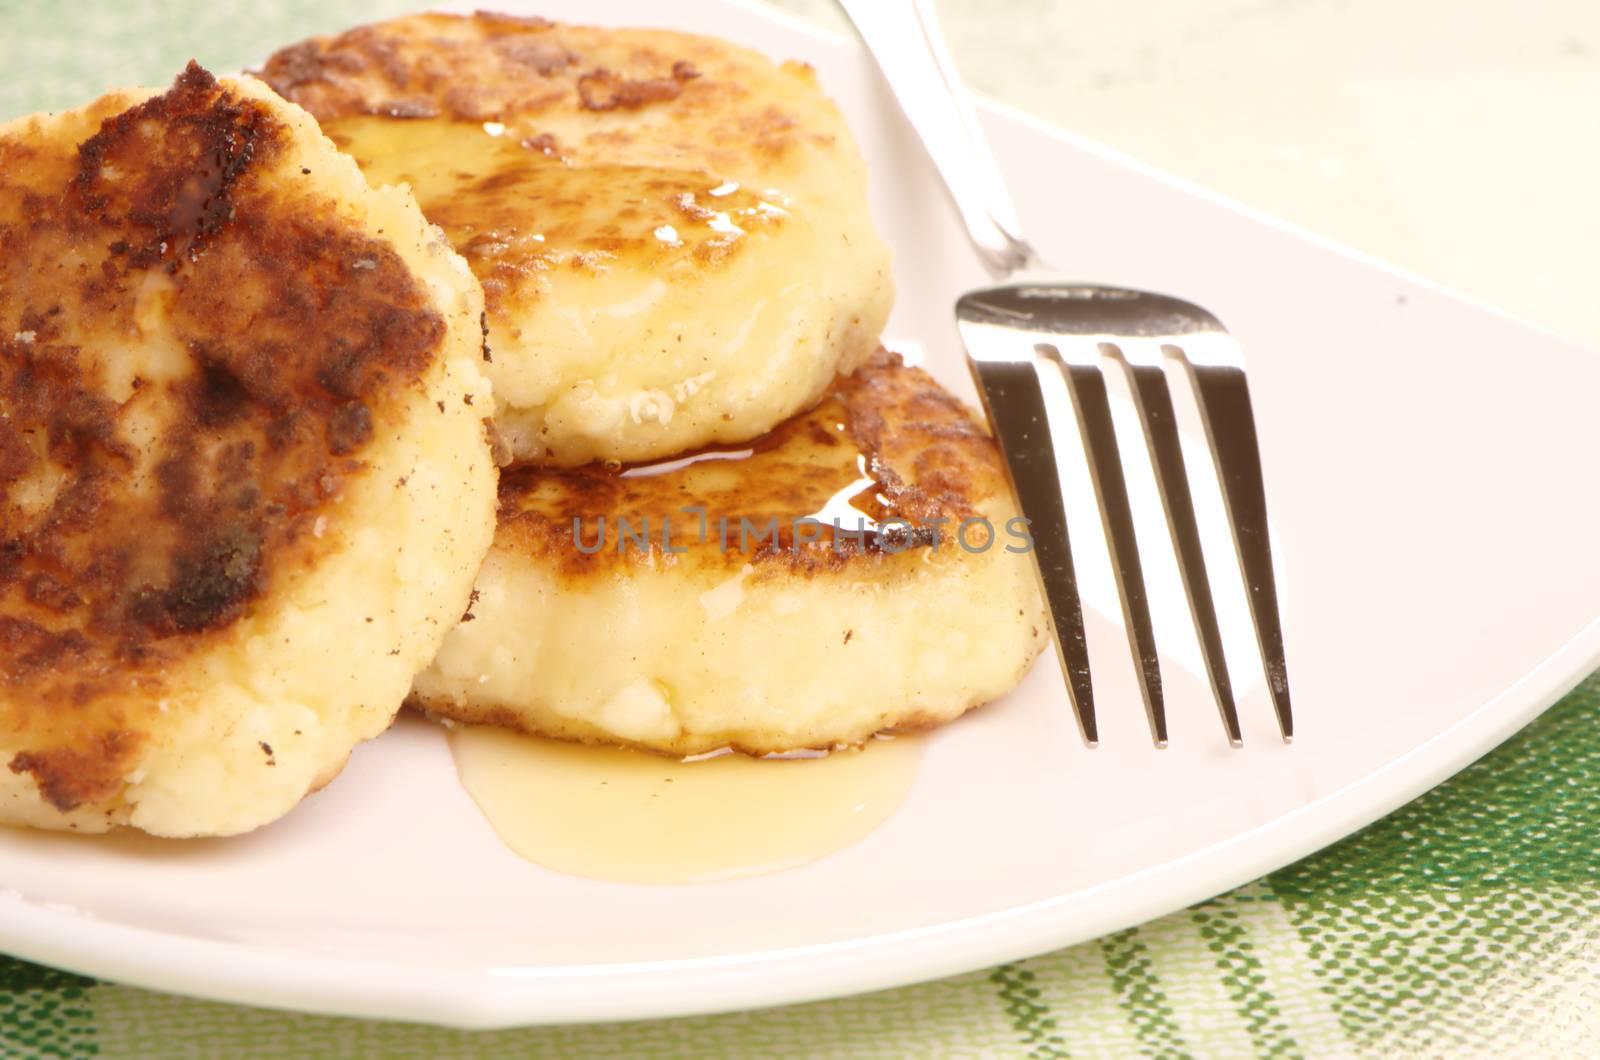 Delicious homemade cheese pancakes with honey closeup